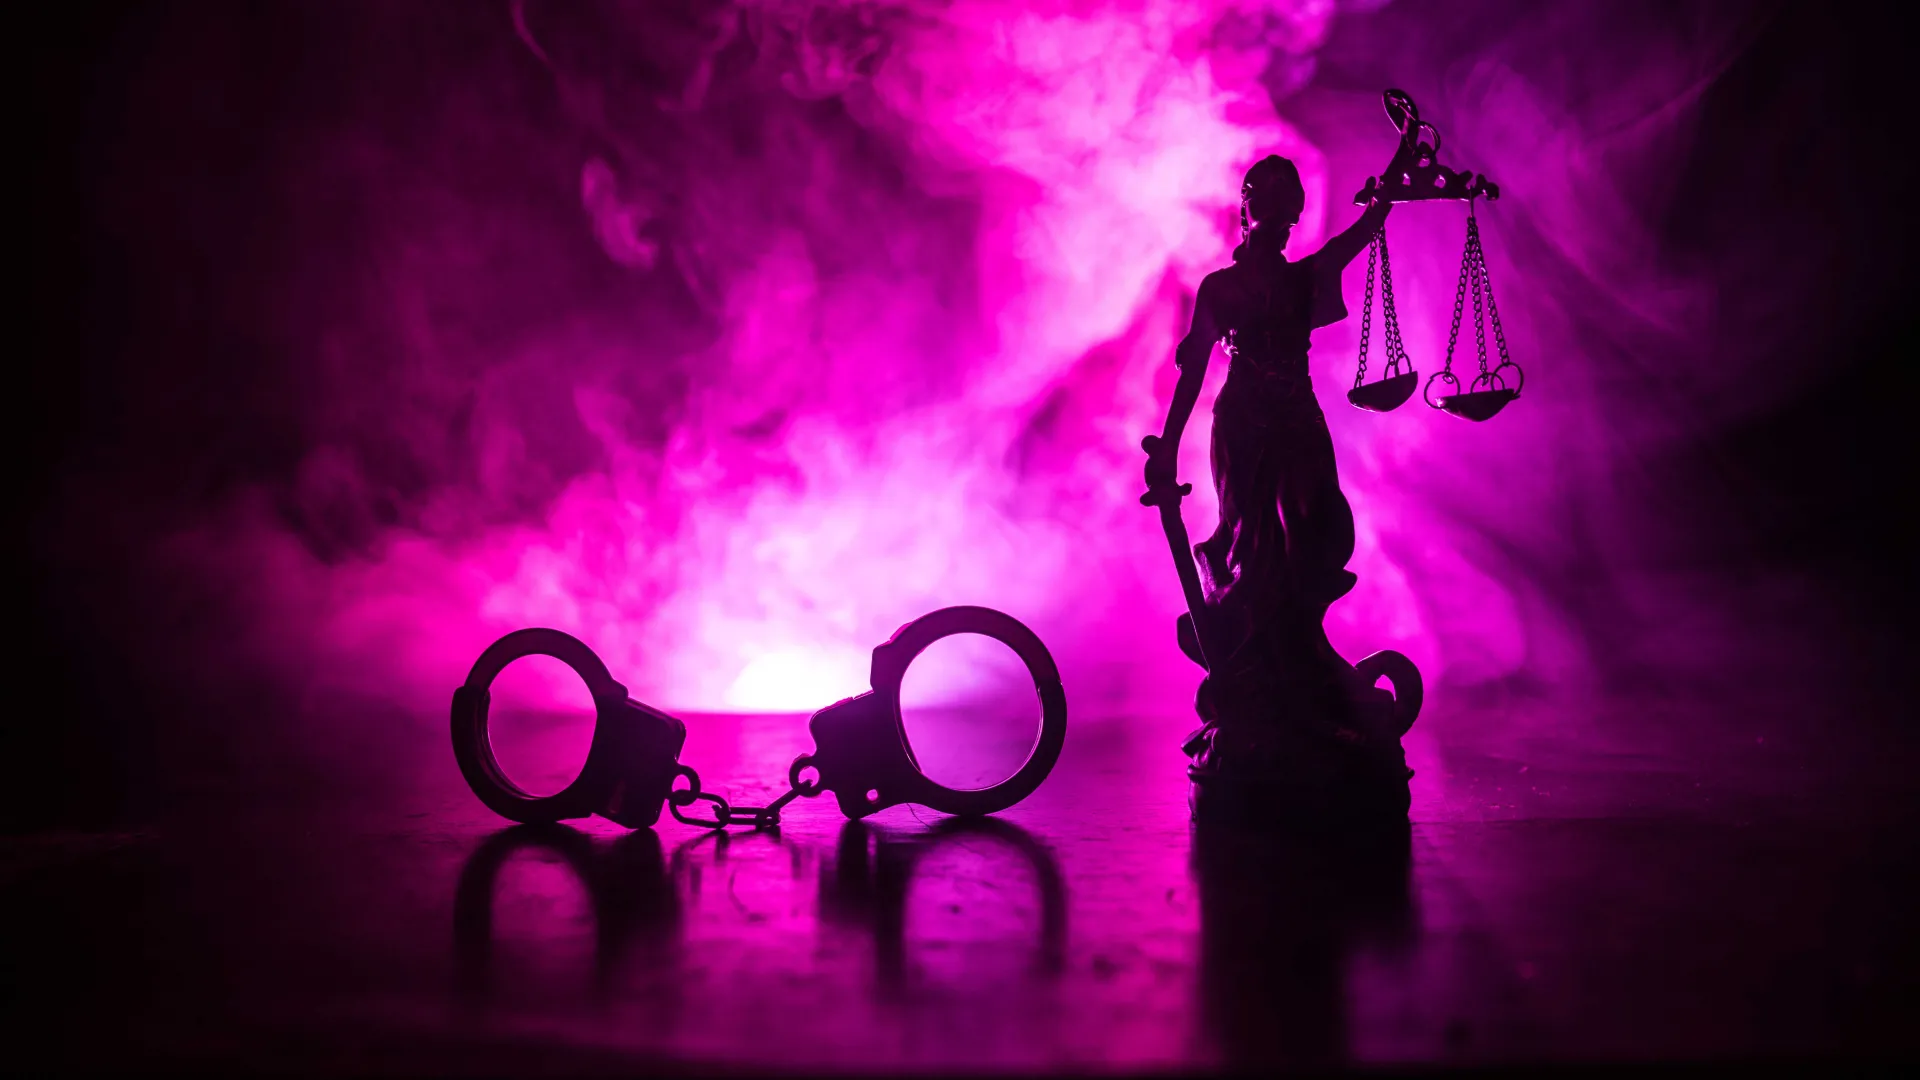 Criminal justice illustration: handcuffs and scales of justice